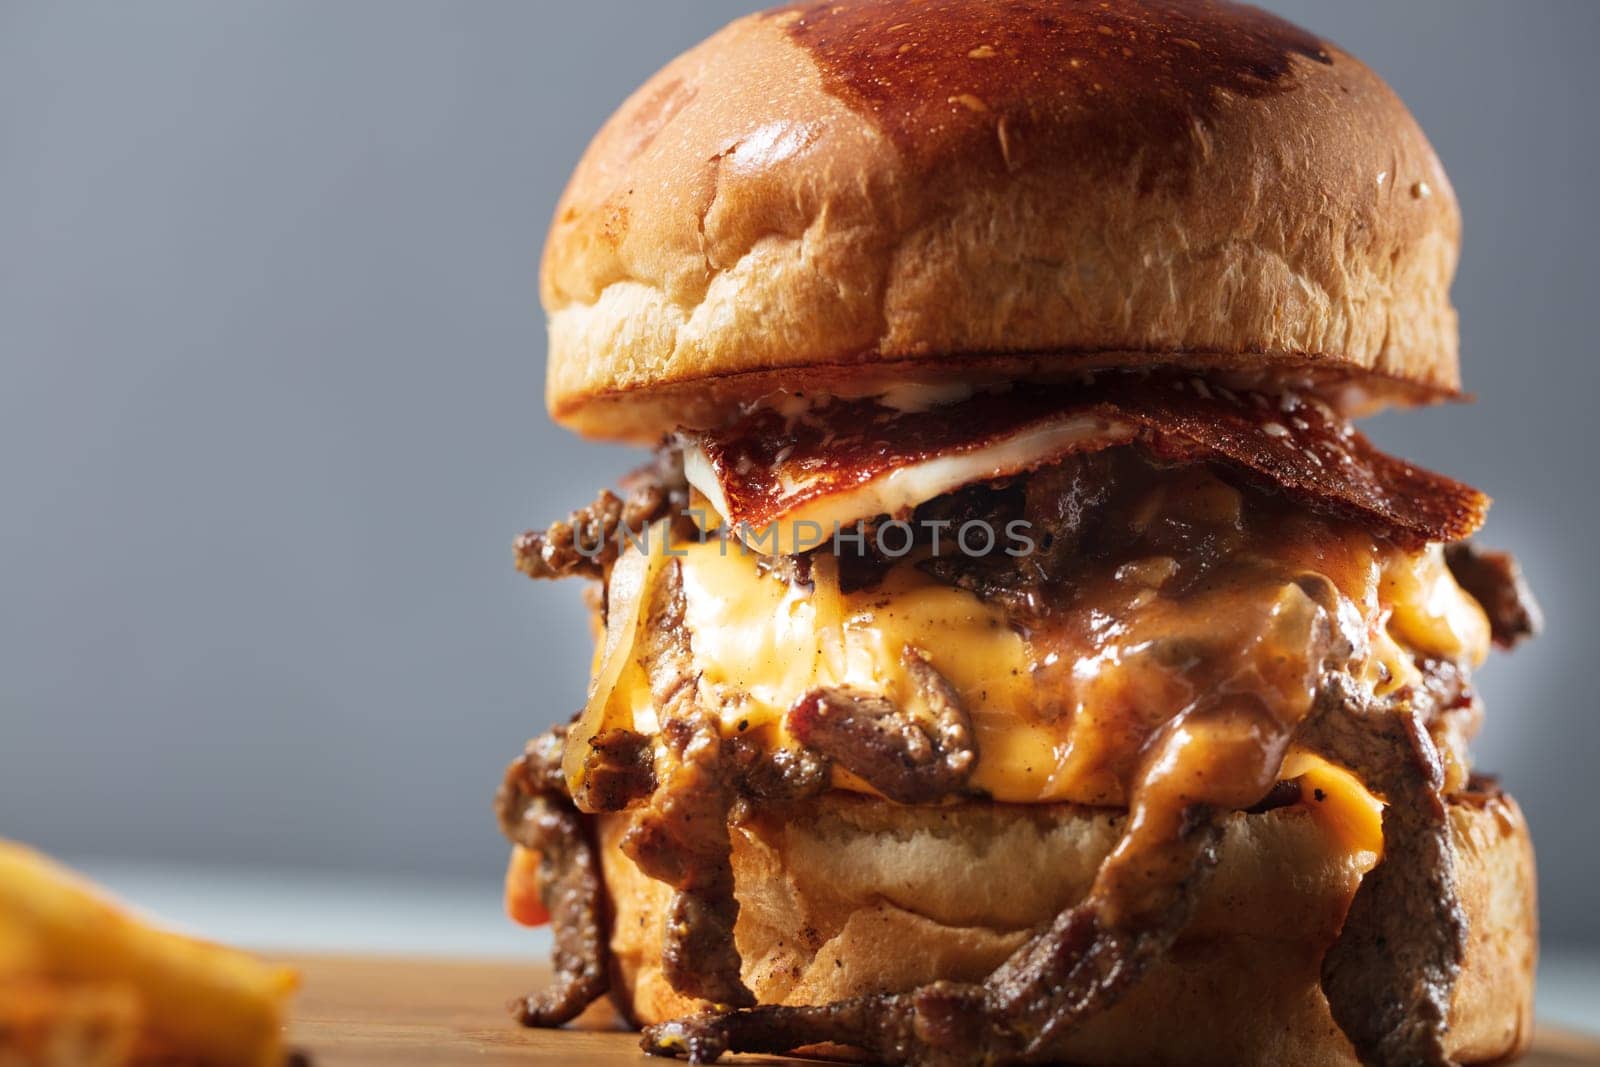 Double steak burger with smoked bacon, cheddar cheese and bbq sauce. High quality photo